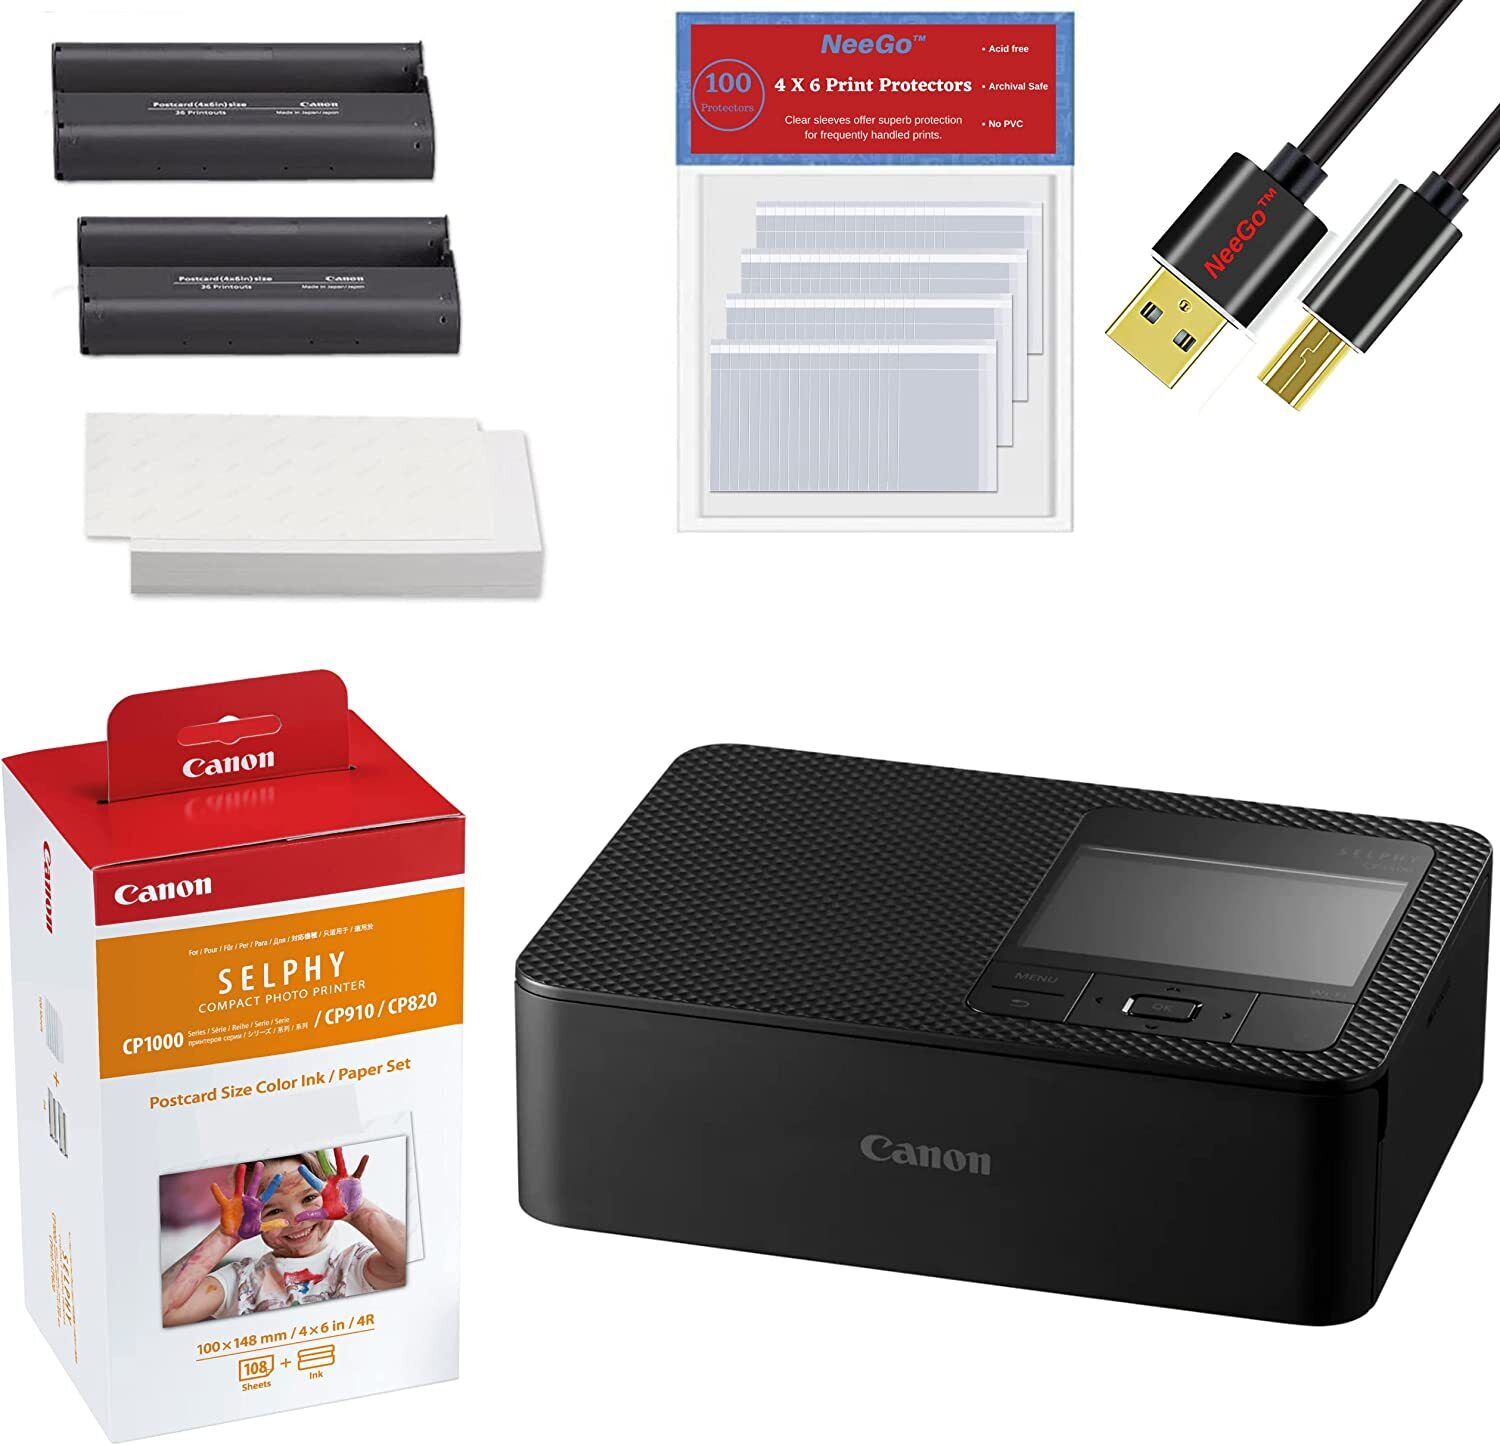 NEEGO Canon SELPHY CP1500 Wireless Compact Photo Printer + Cable